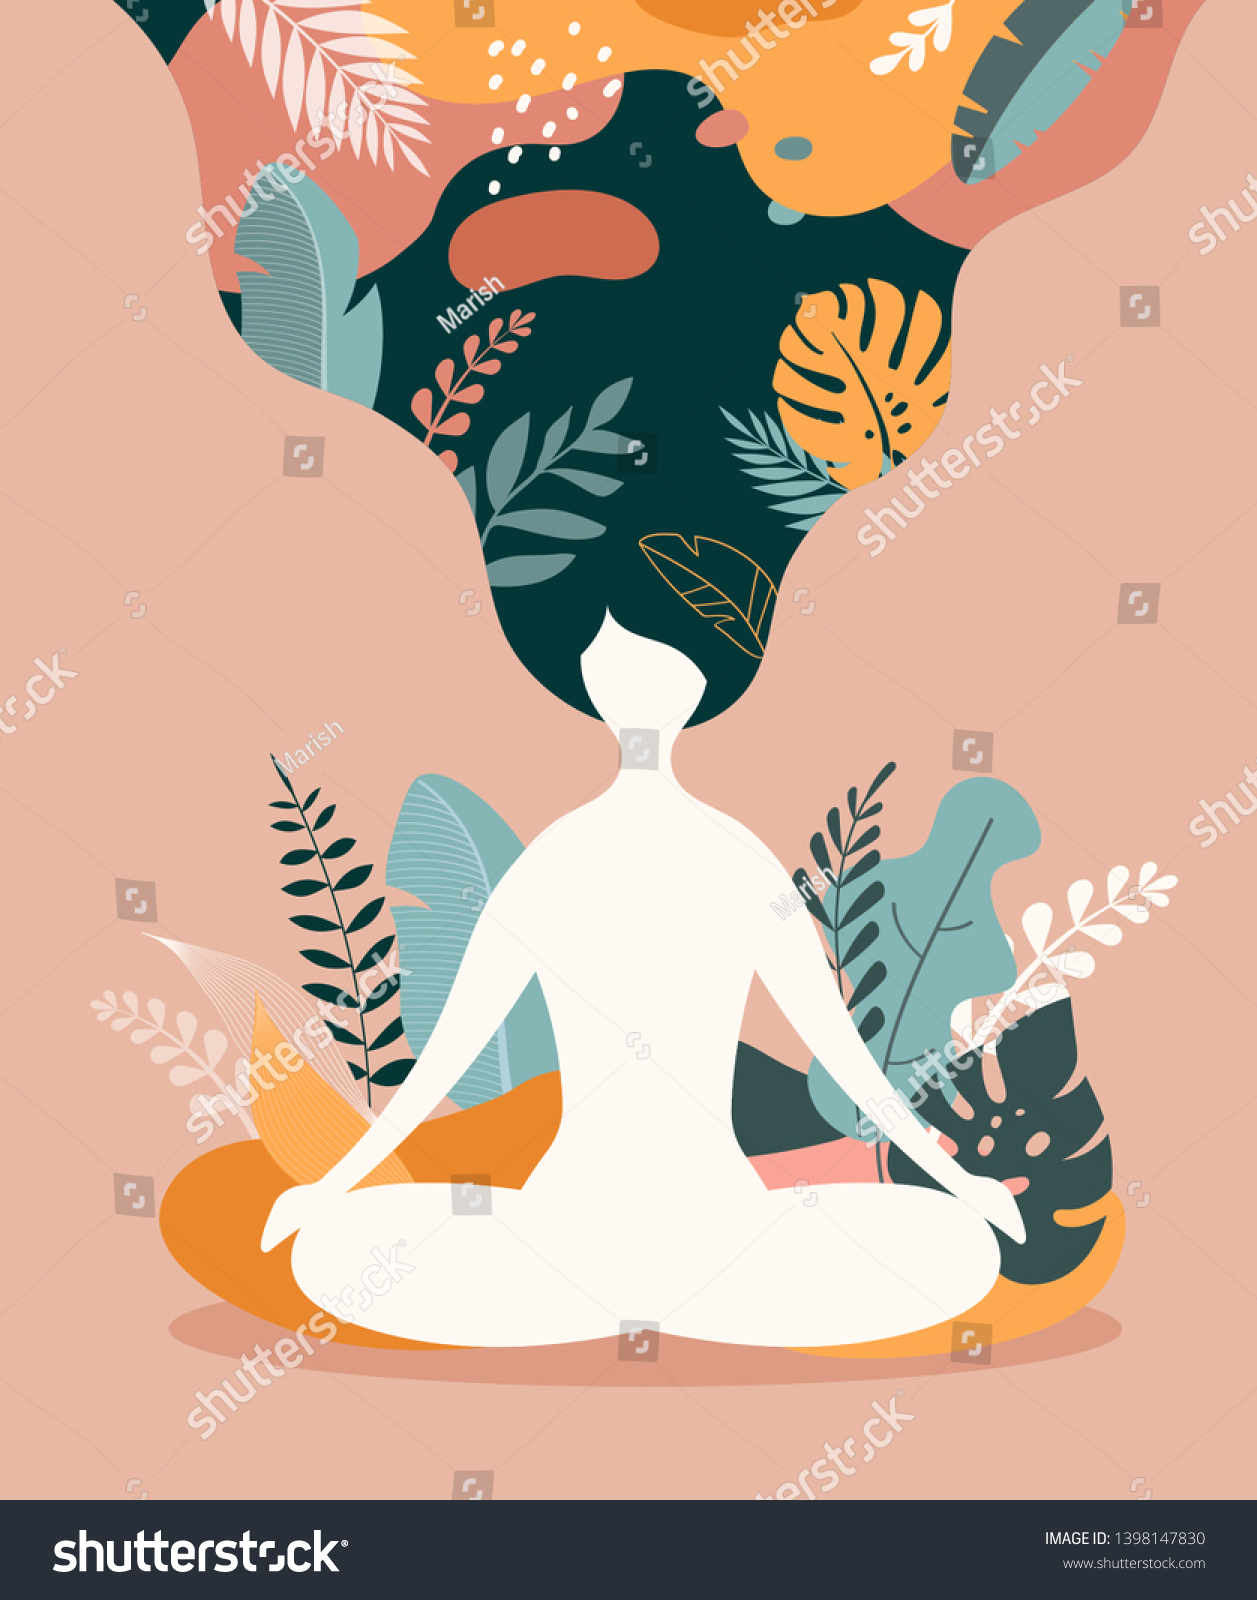 SVG of Mindfulness, meditation and yoga background in pastel vintage colors with women sit with crossed legs and meditate. Vector illustration  svg